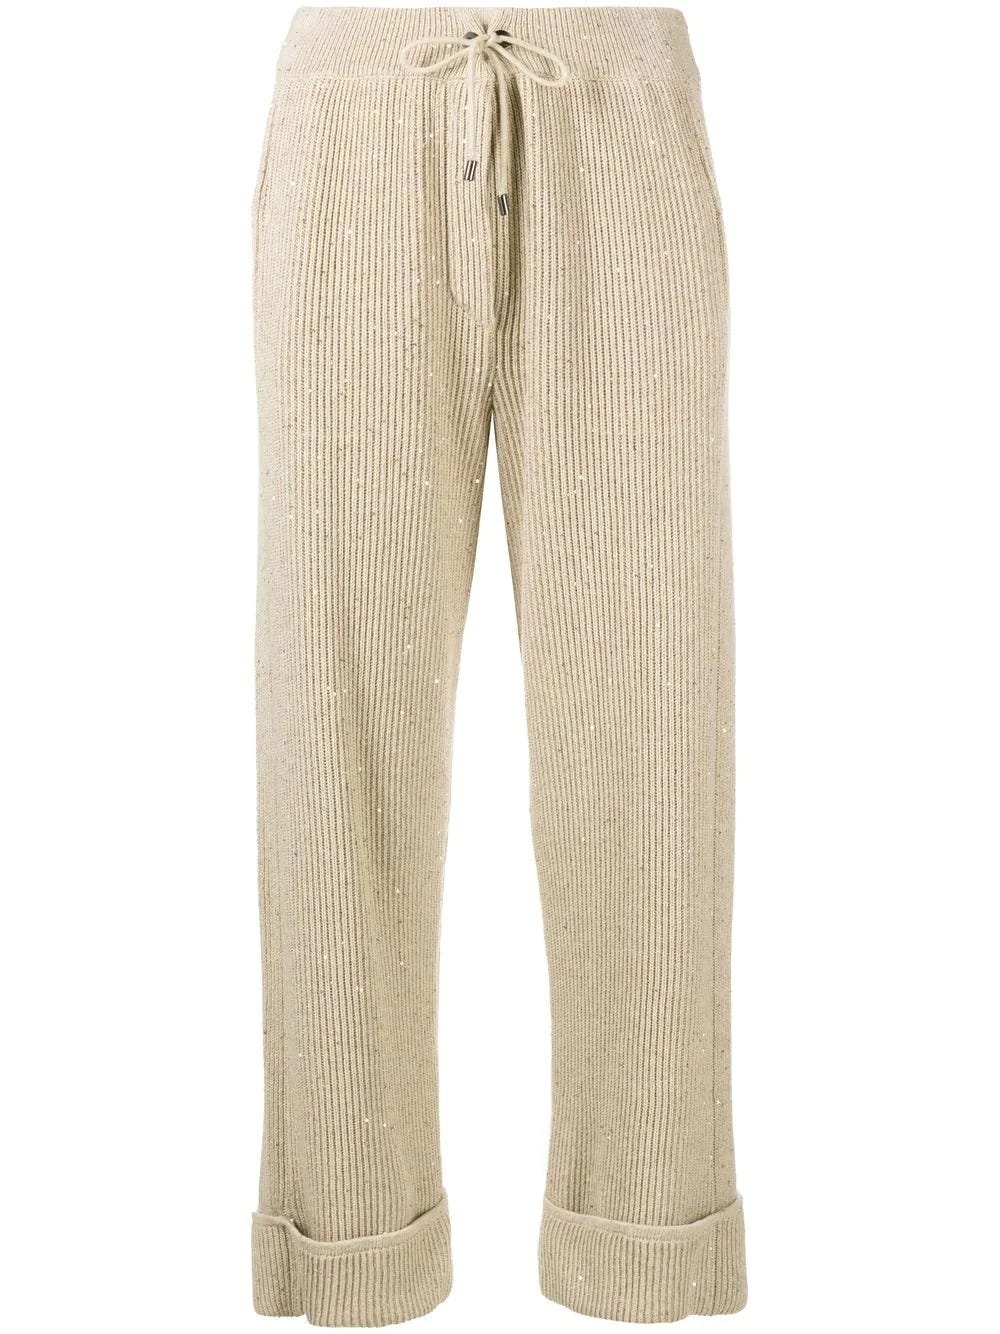 BRUNELLO CUCINELLI DAZZLING BEIGE RIBBED TROUSERS